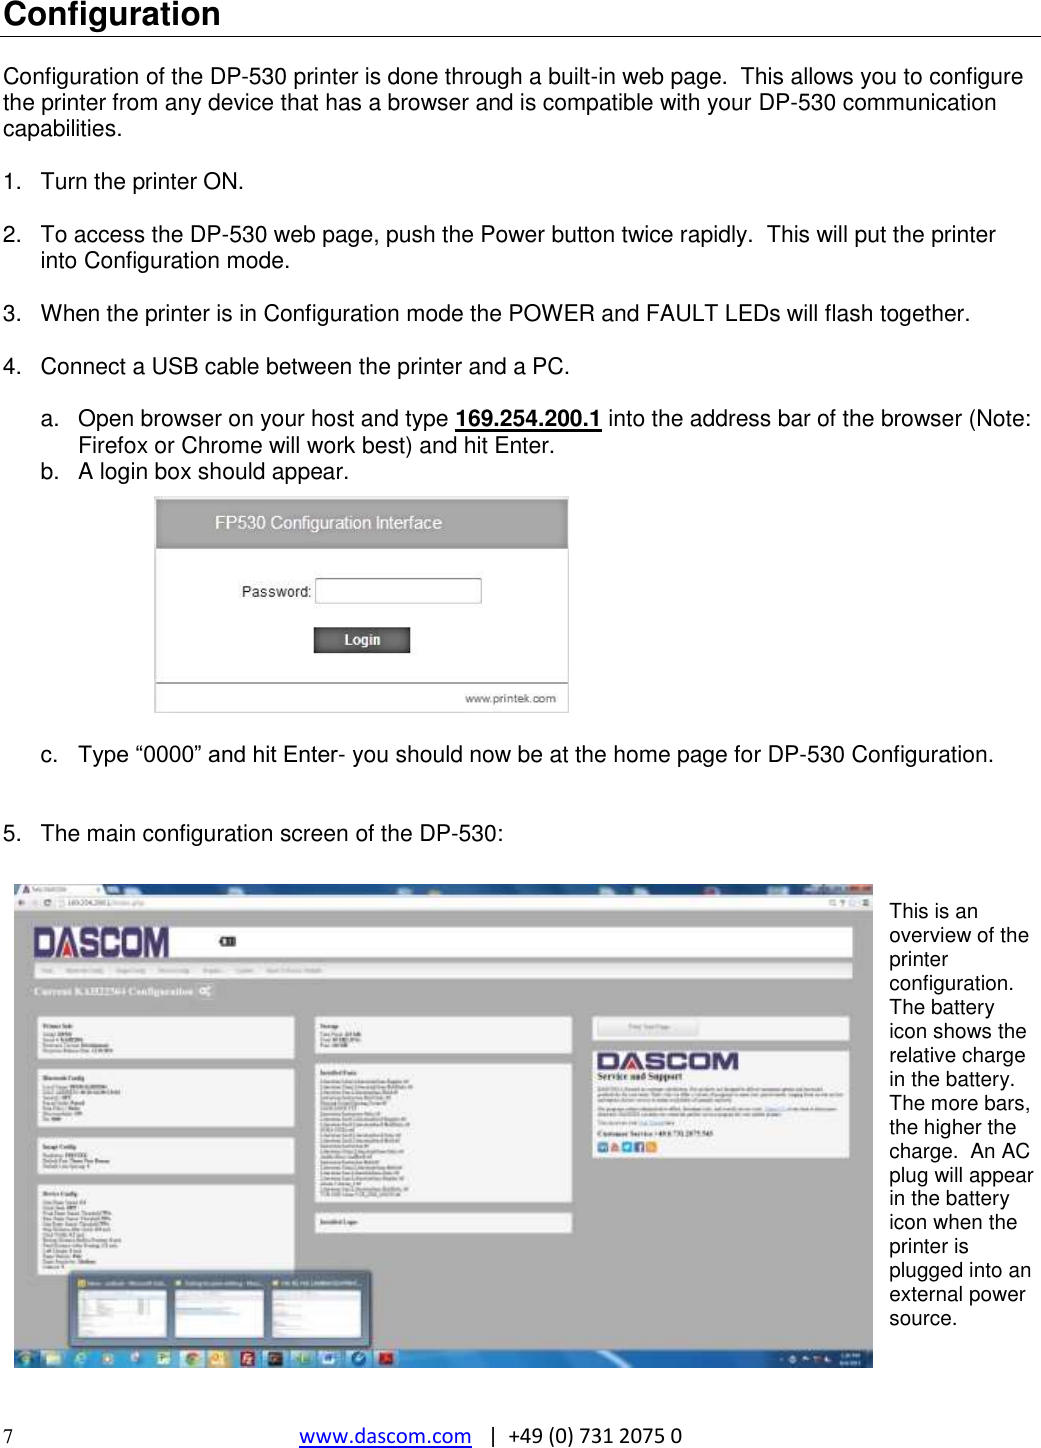  7  www.dascom.com   |  +49 (0) 731 2075 0 Configuration  Configuration of the DP-530 printer is done through a built-in web page.  This allows you to configure the printer from any device that has a browser and is compatible with your DP-530 communication capabilities.  1.  Turn the printer ON.  2.  To access the DP-530 web page, push the Power button twice rapidly.  This will put the printer into Configuration mode.    3.  When the printer is in Configuration mode the POWER and FAULT LEDs will flash together.  4.  Connect a USB cable between the printer and a PC.  a.  Open browser on your host and type 169.254.200.1 into the address bar of the browser (Note: Firefox or Chrome will work best) and hit Enter. b.  A login box should appear.           c.  Type “0000” and hit Enter- you should now be at the home page for DP-530 Configuration.   5.  The main configuration screen of the DP-530:   This is an overview of the printer configuration.  The battery icon shows the relative charge in the battery.  The more bars, the higher the charge.  An AC plug will appear in the battery icon when the printer is plugged into an external power source.   